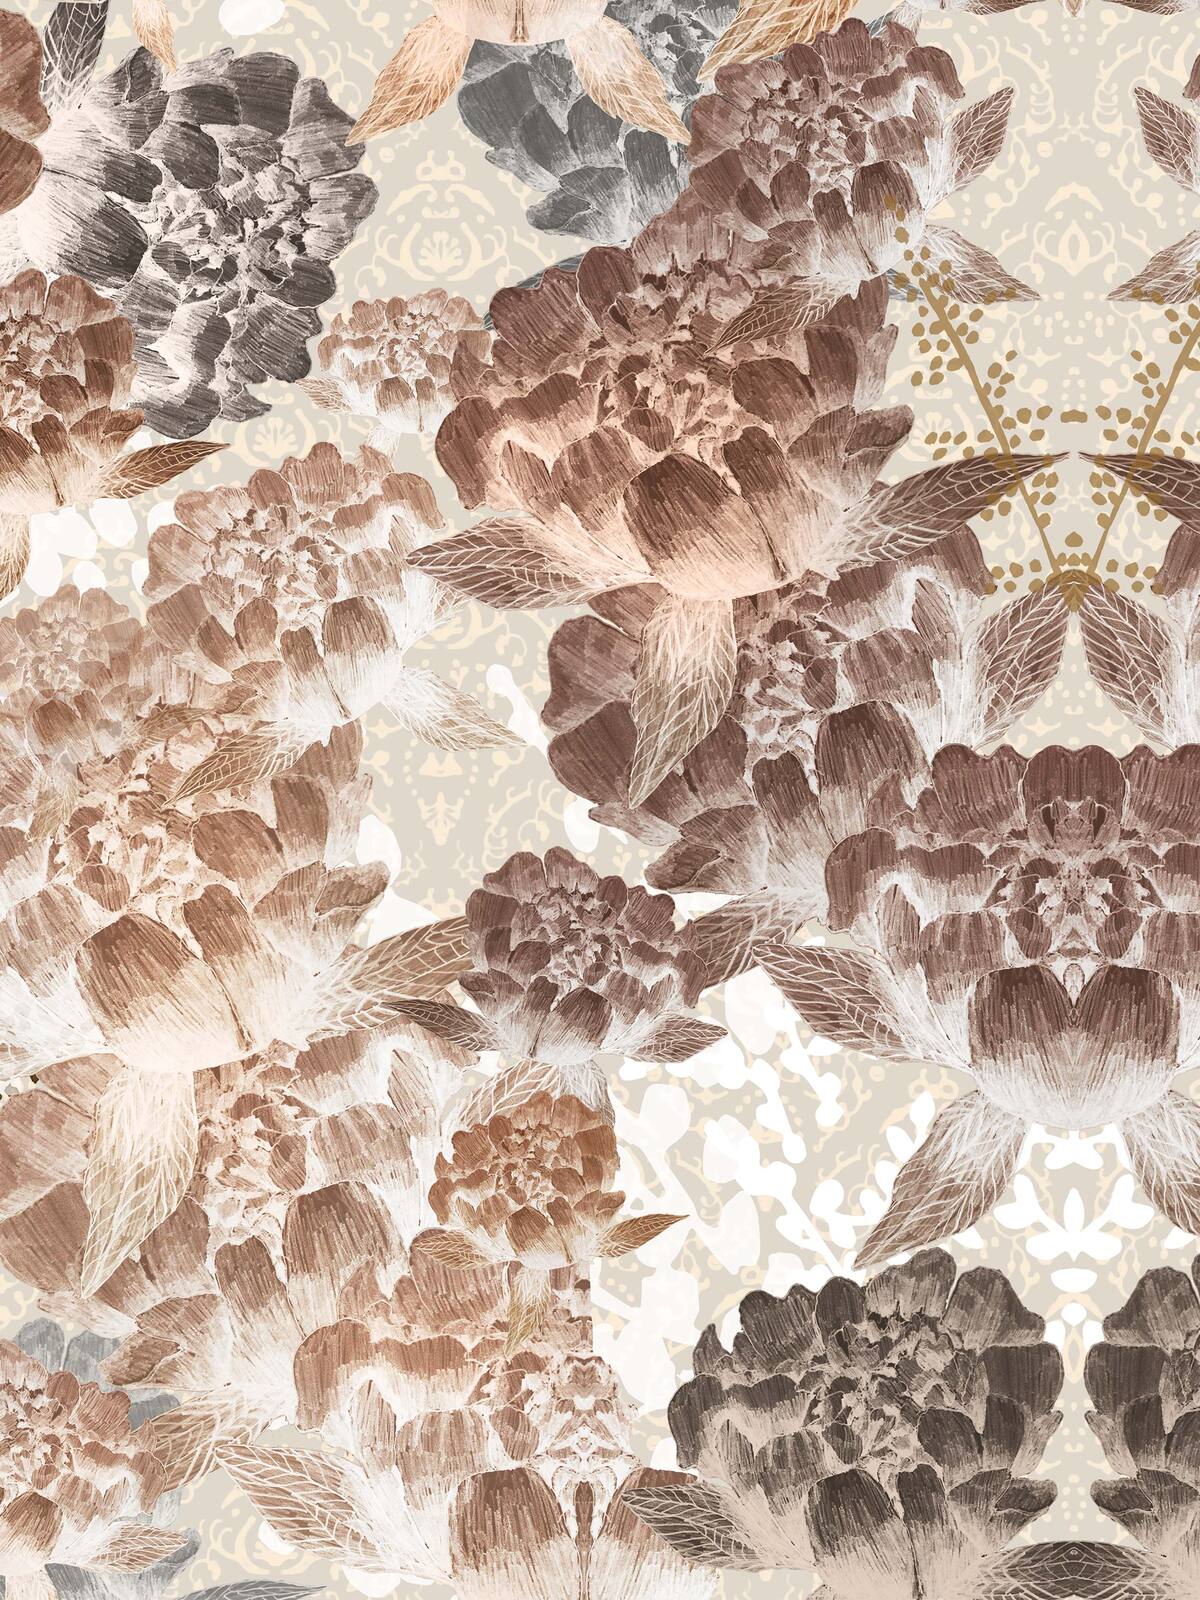 Our Perennial Radiance wallpaper has a dense, stylized pattern